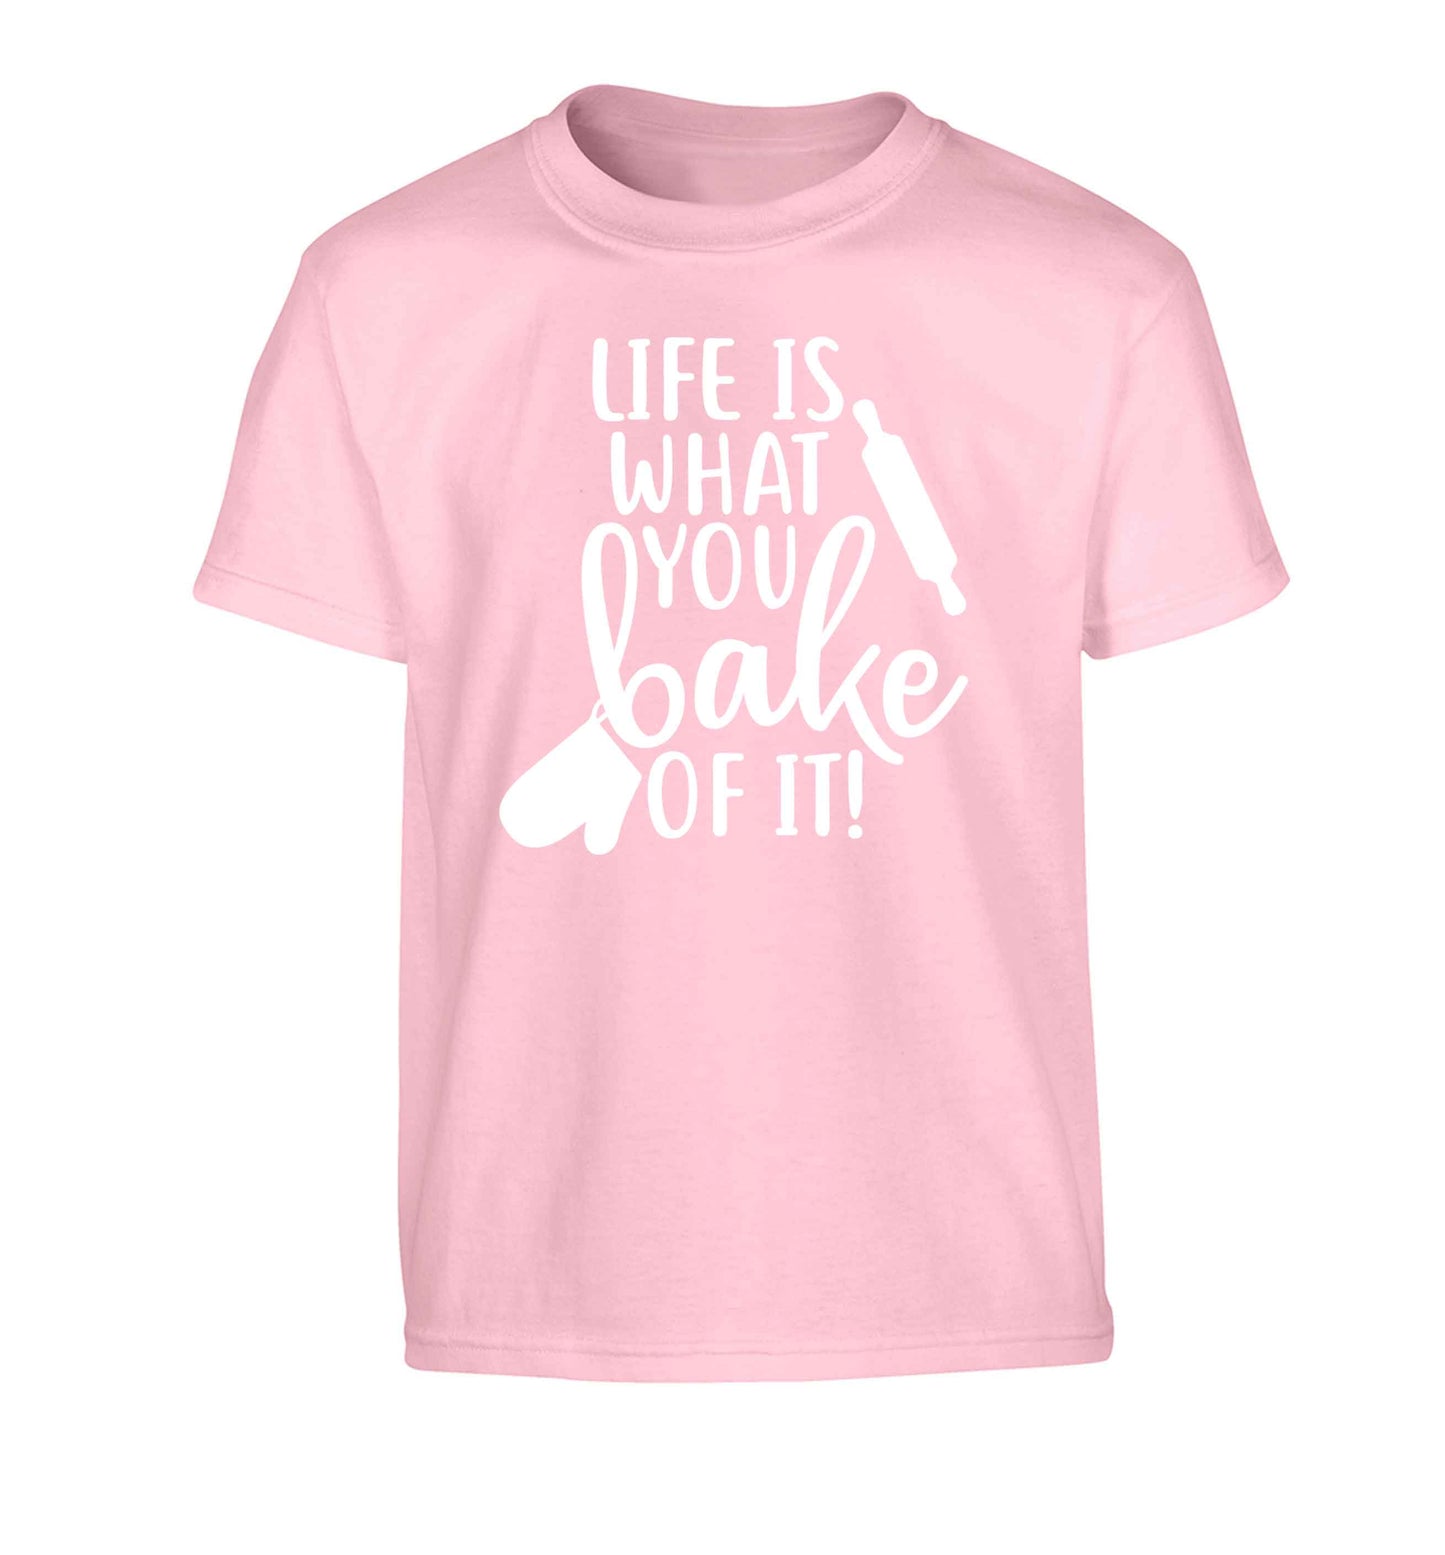 Life is what you bake of it Children's light pink Tshirt 12-13 Years